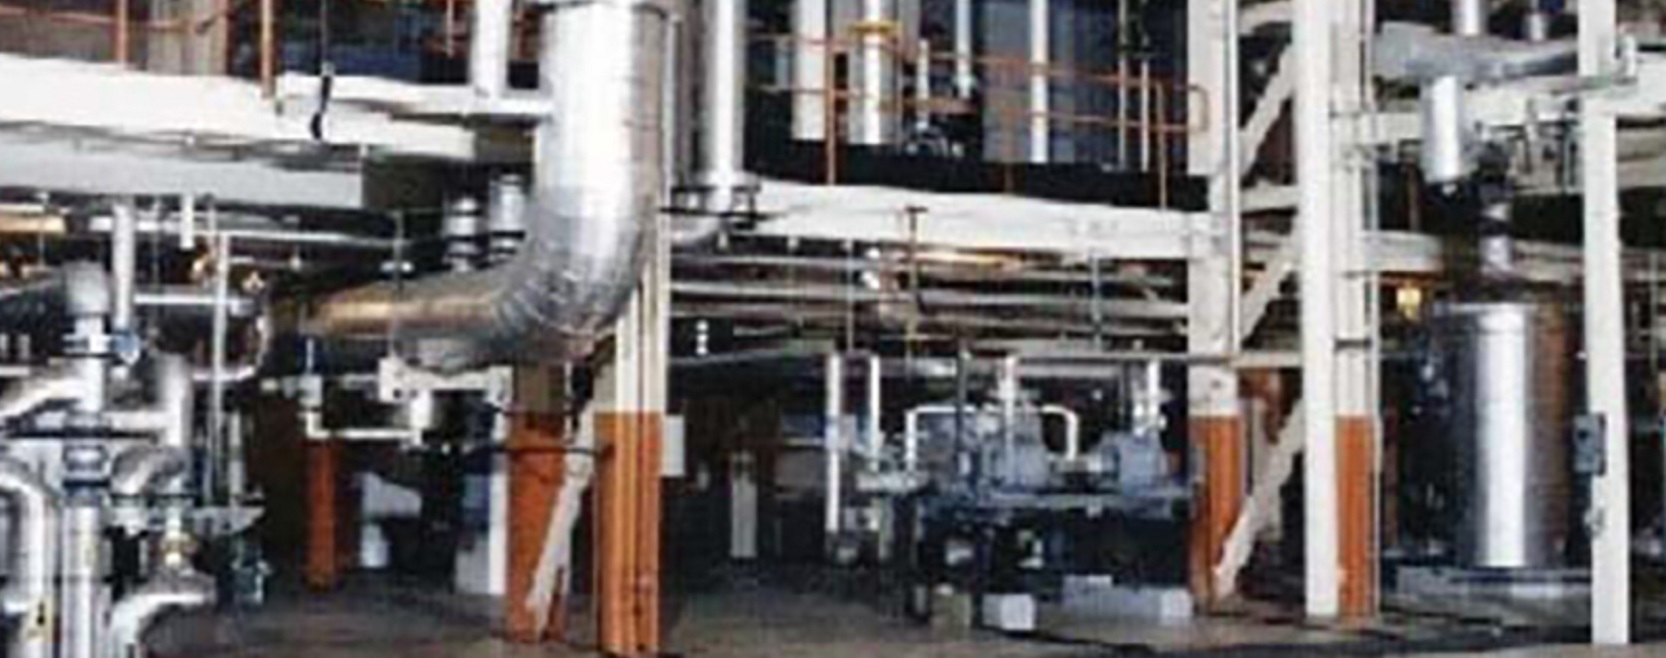 Image: Steam Turbine Generator Project: Campus heating plant solution